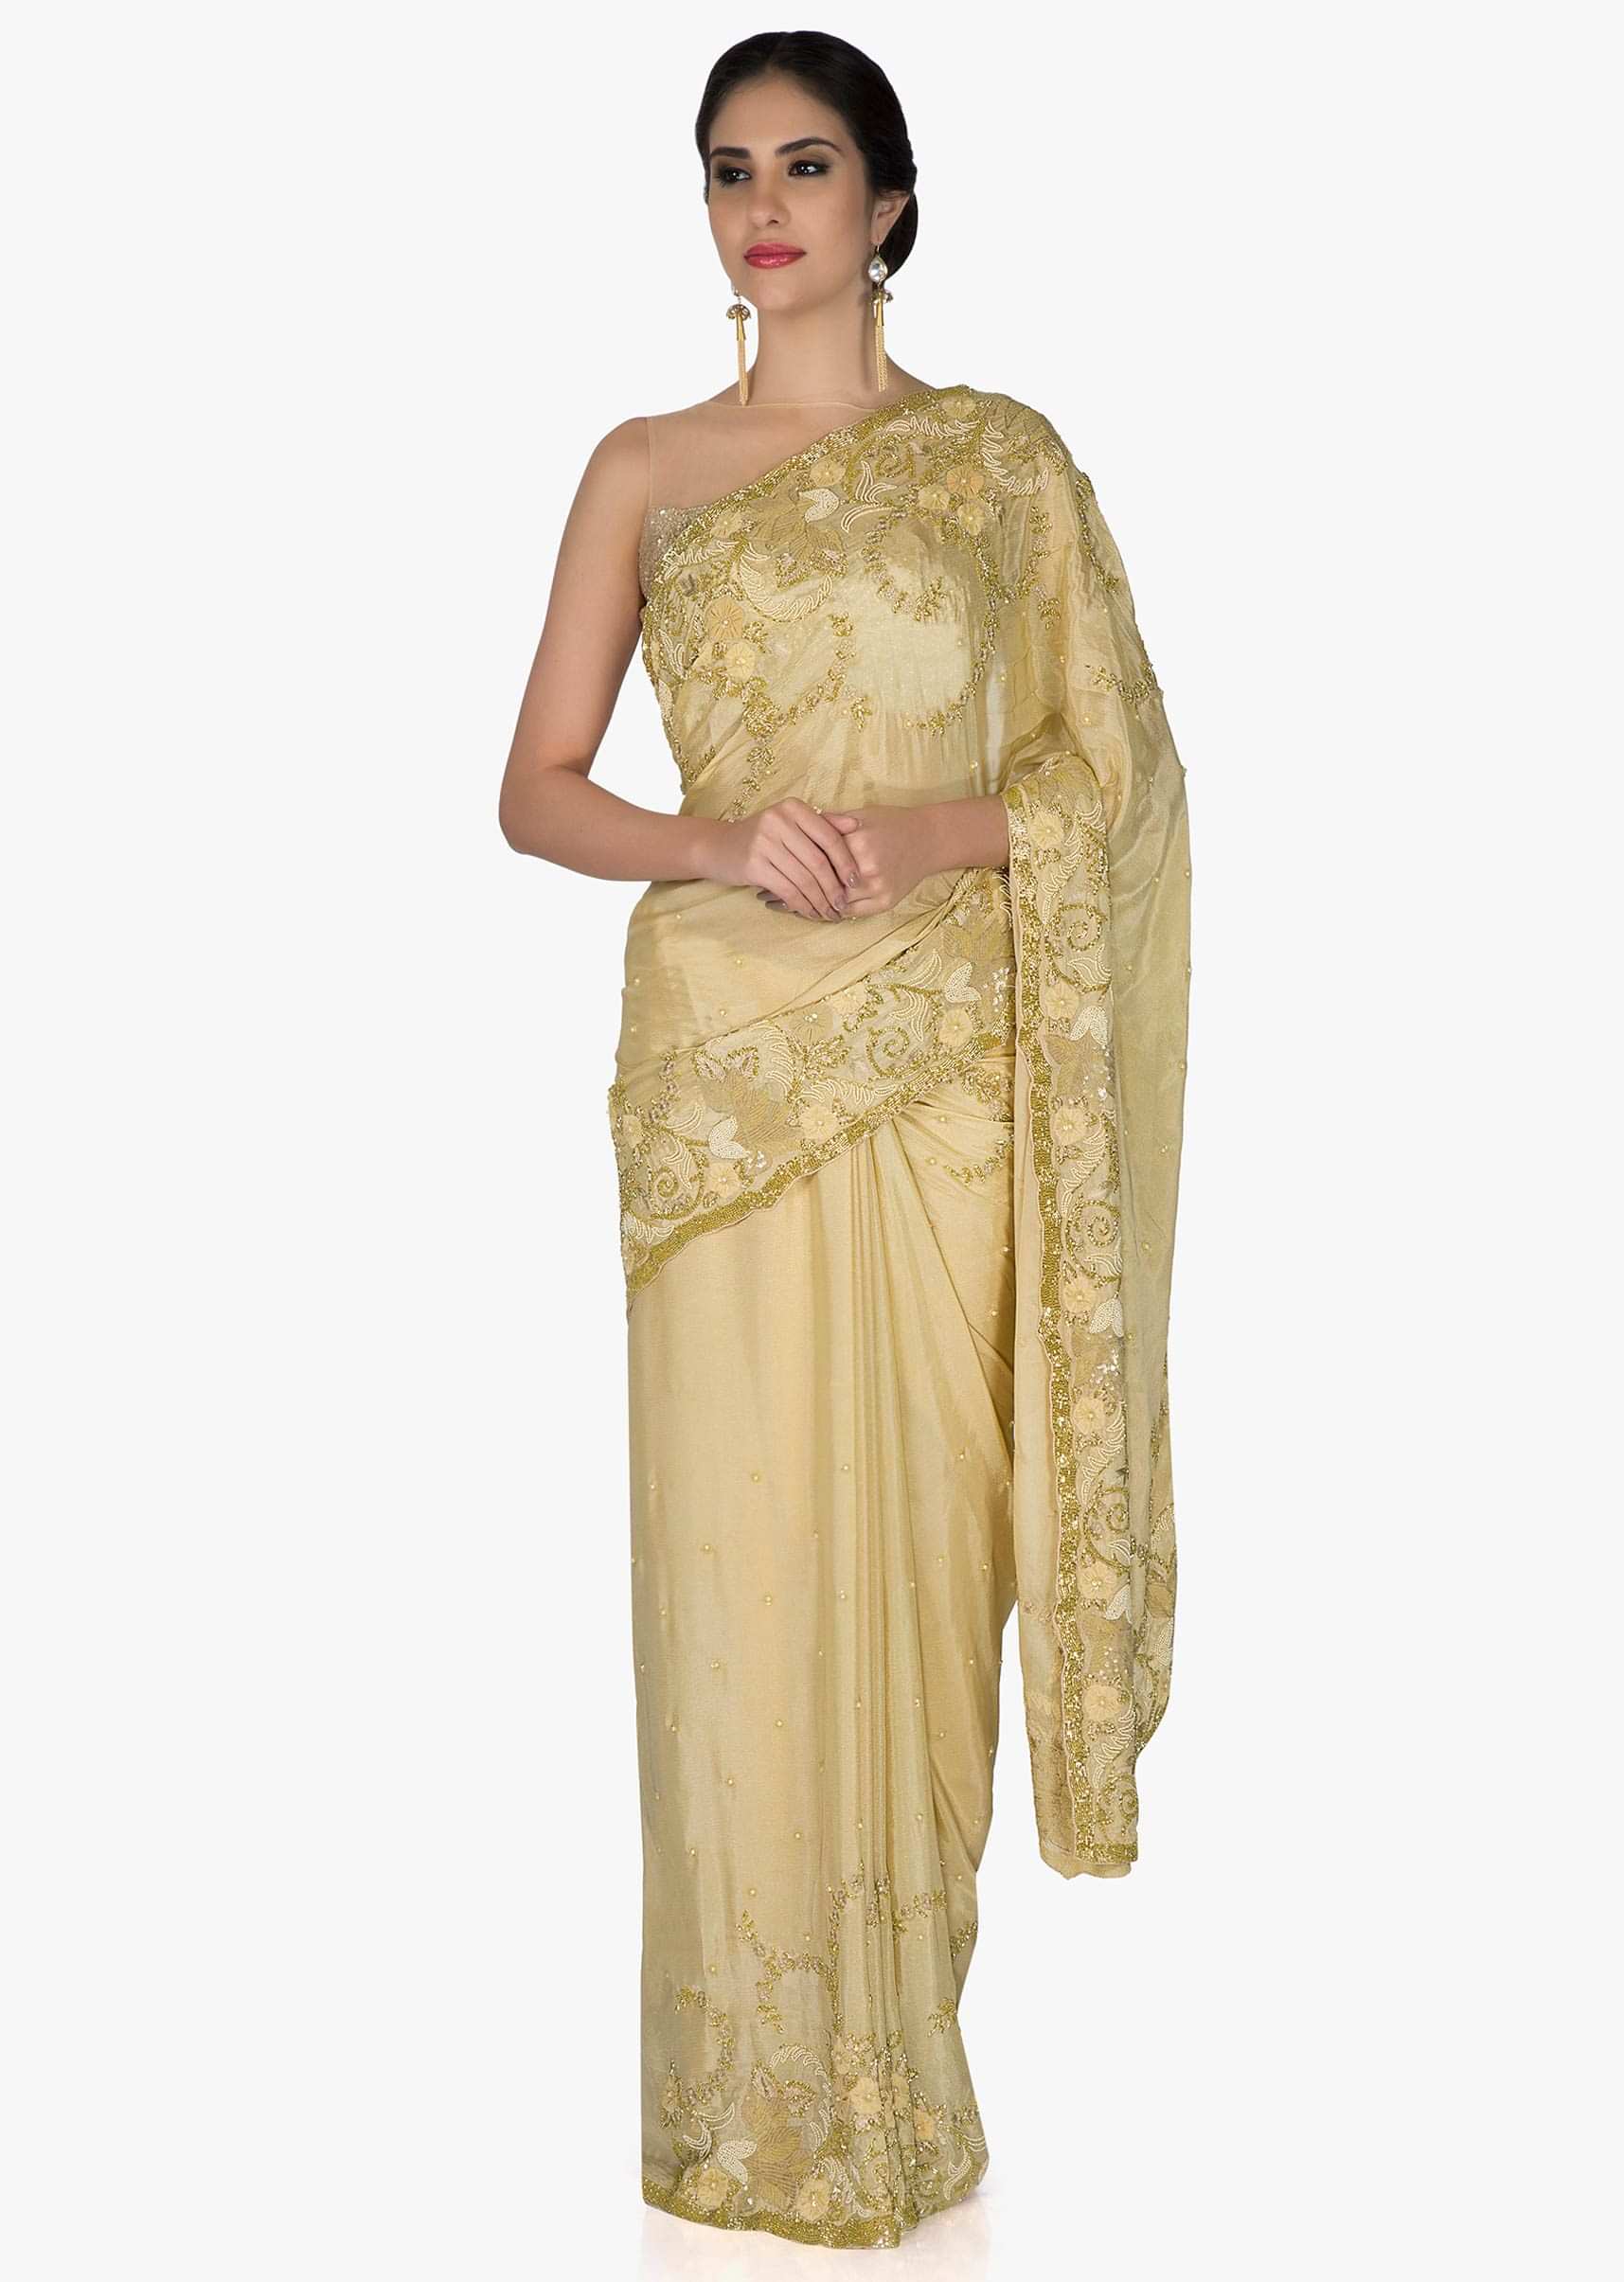 Beige Chiffon Saree and Blouse Crafted with Zari, Cut Dana and Moti only on Kalki